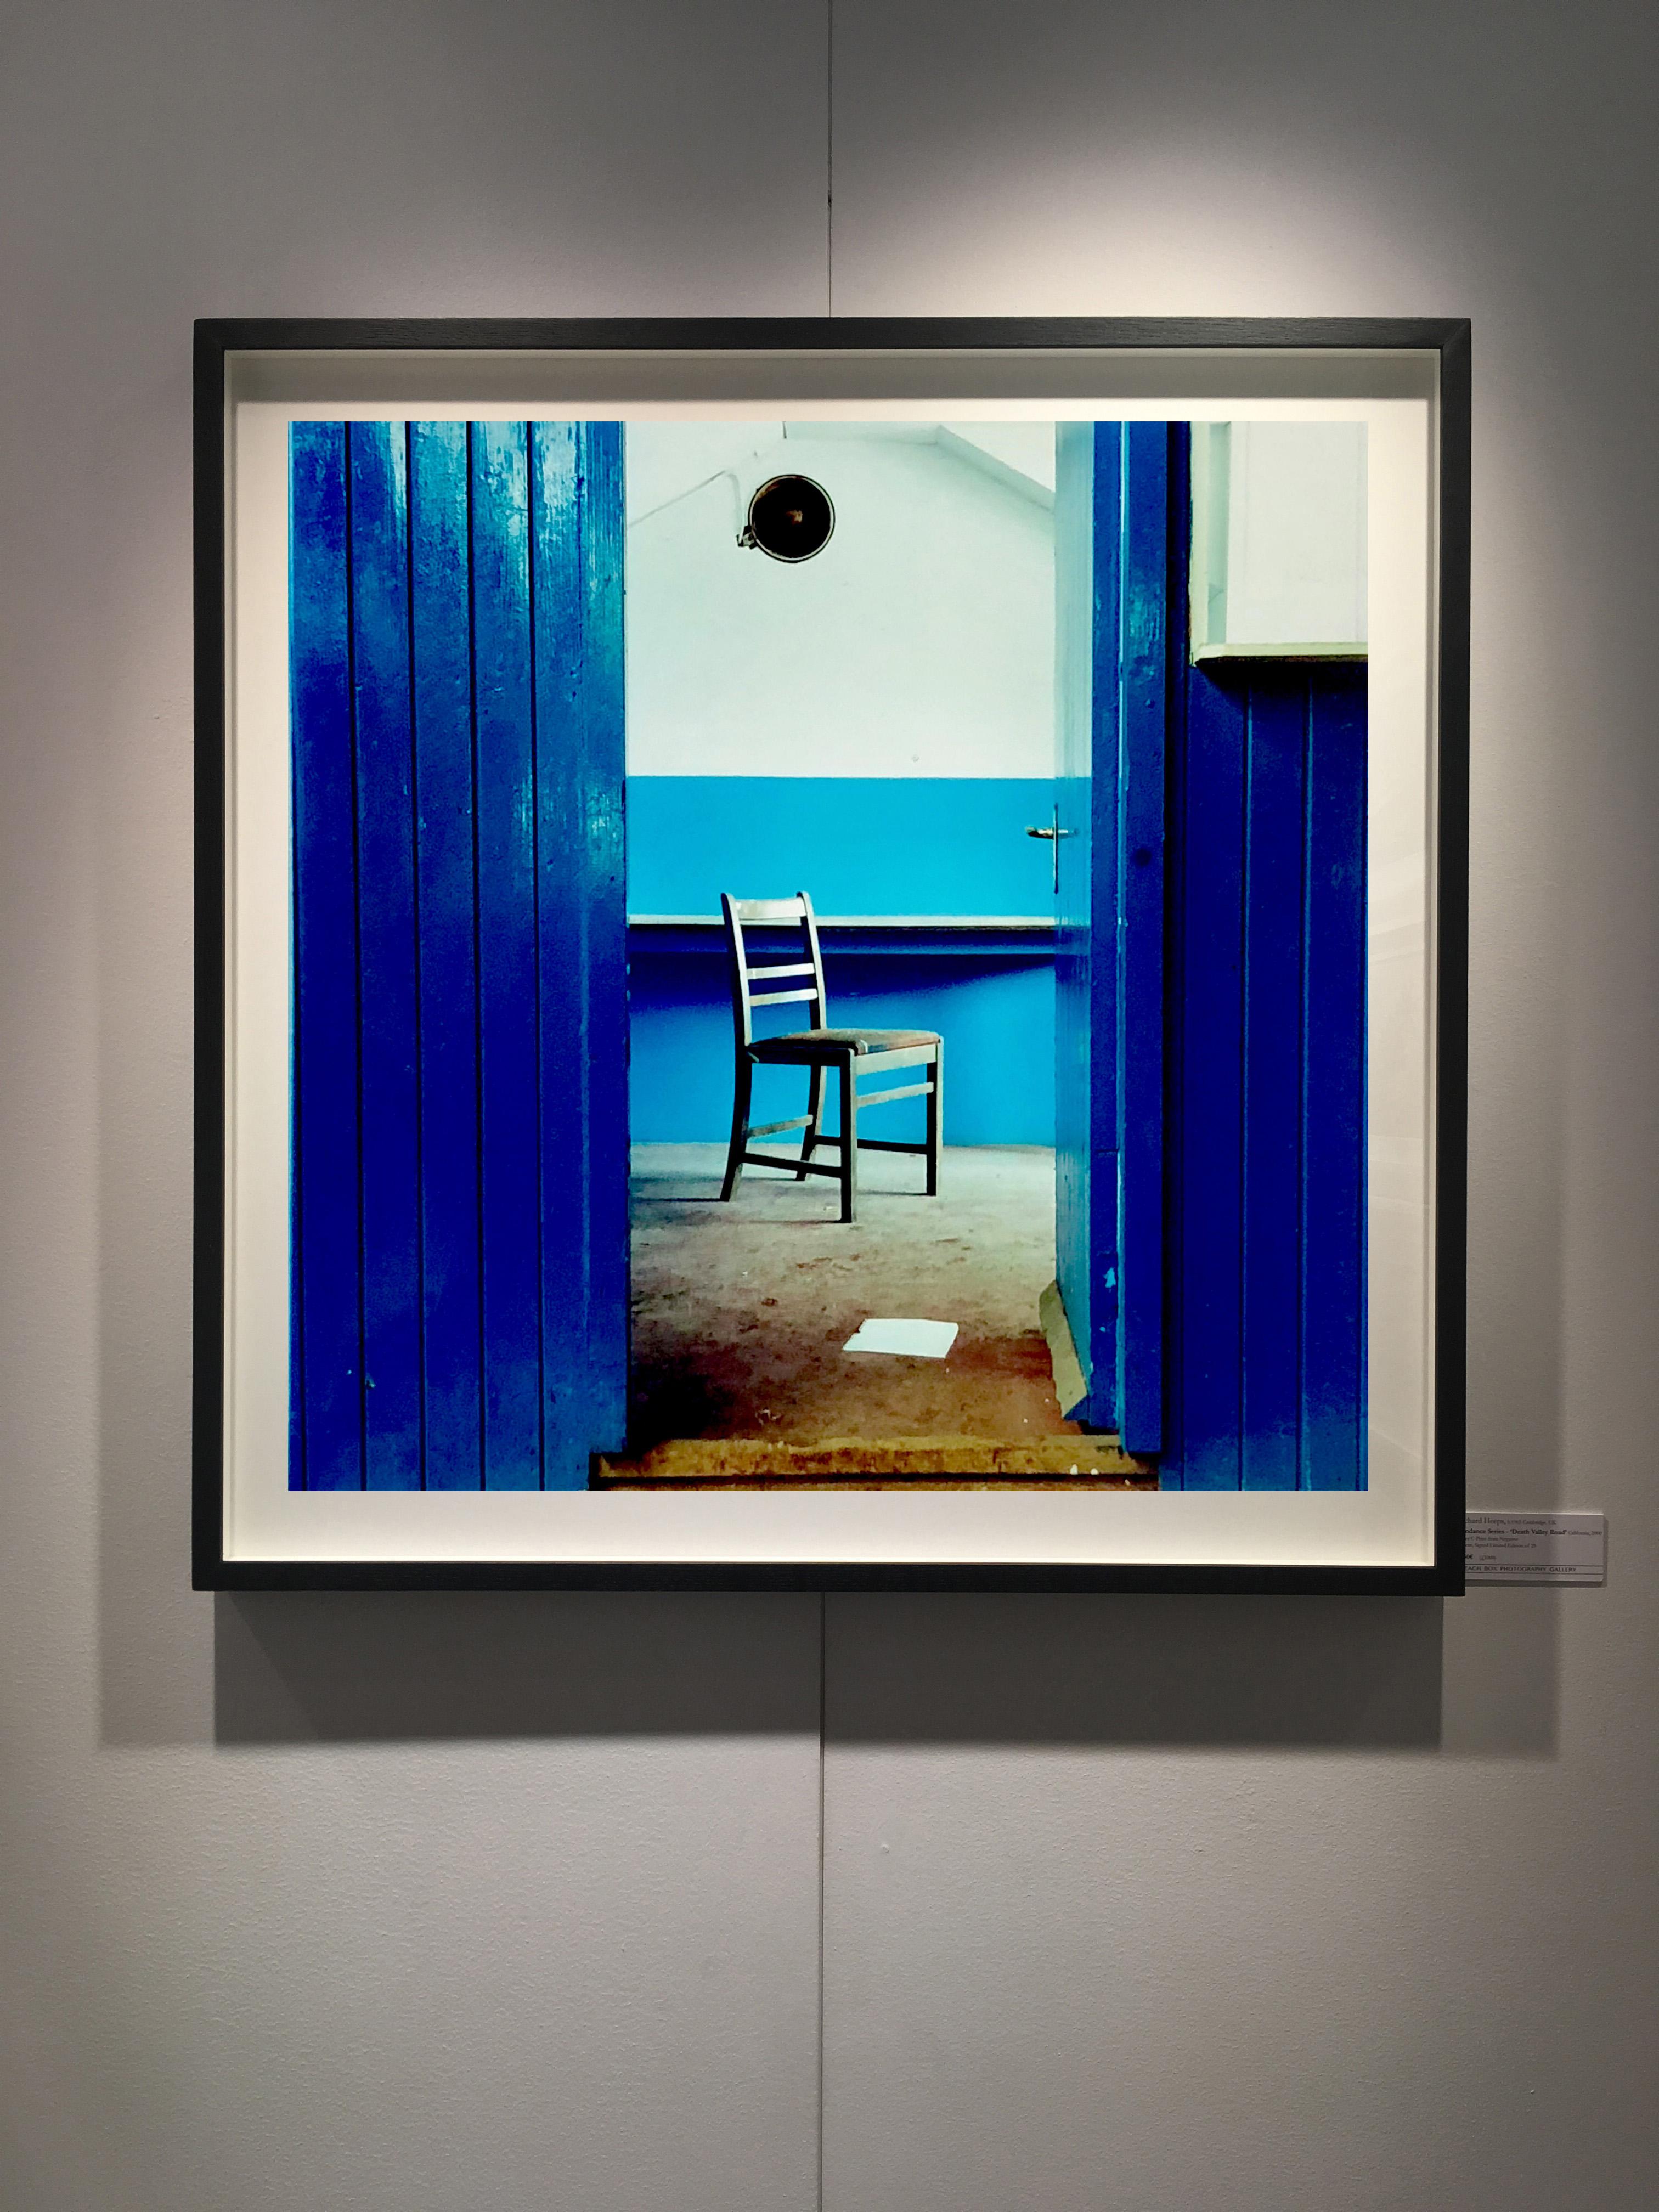 Chair, Northwich - Vintage industrial interior color photography - Print by Richard Heeps